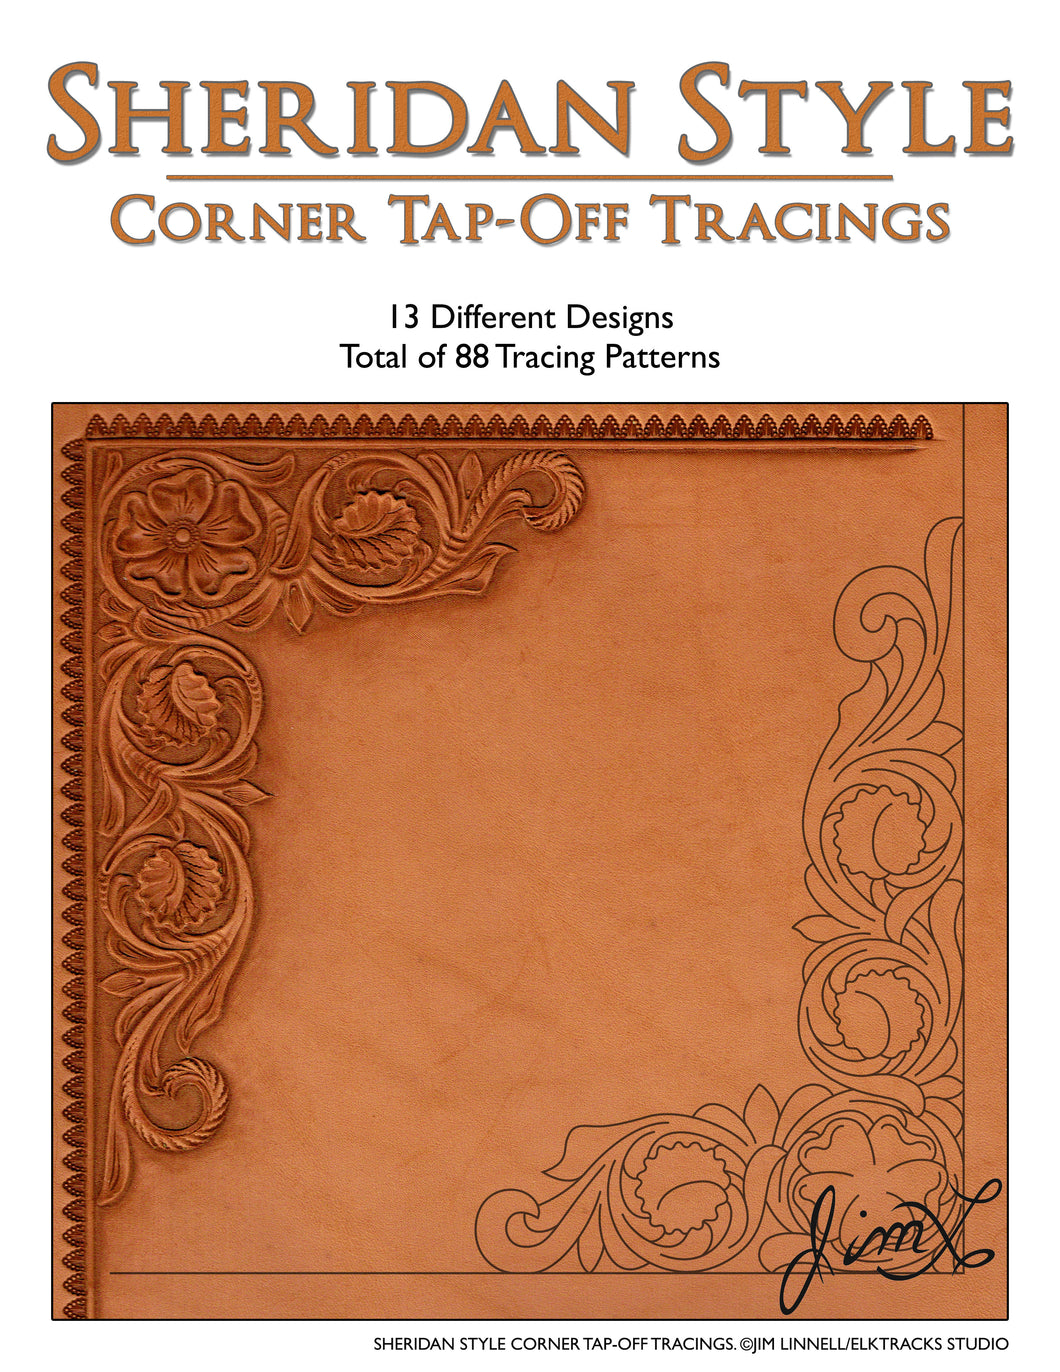 Sheridan Style Corner Tap-Off Tracings by Jim Linnell